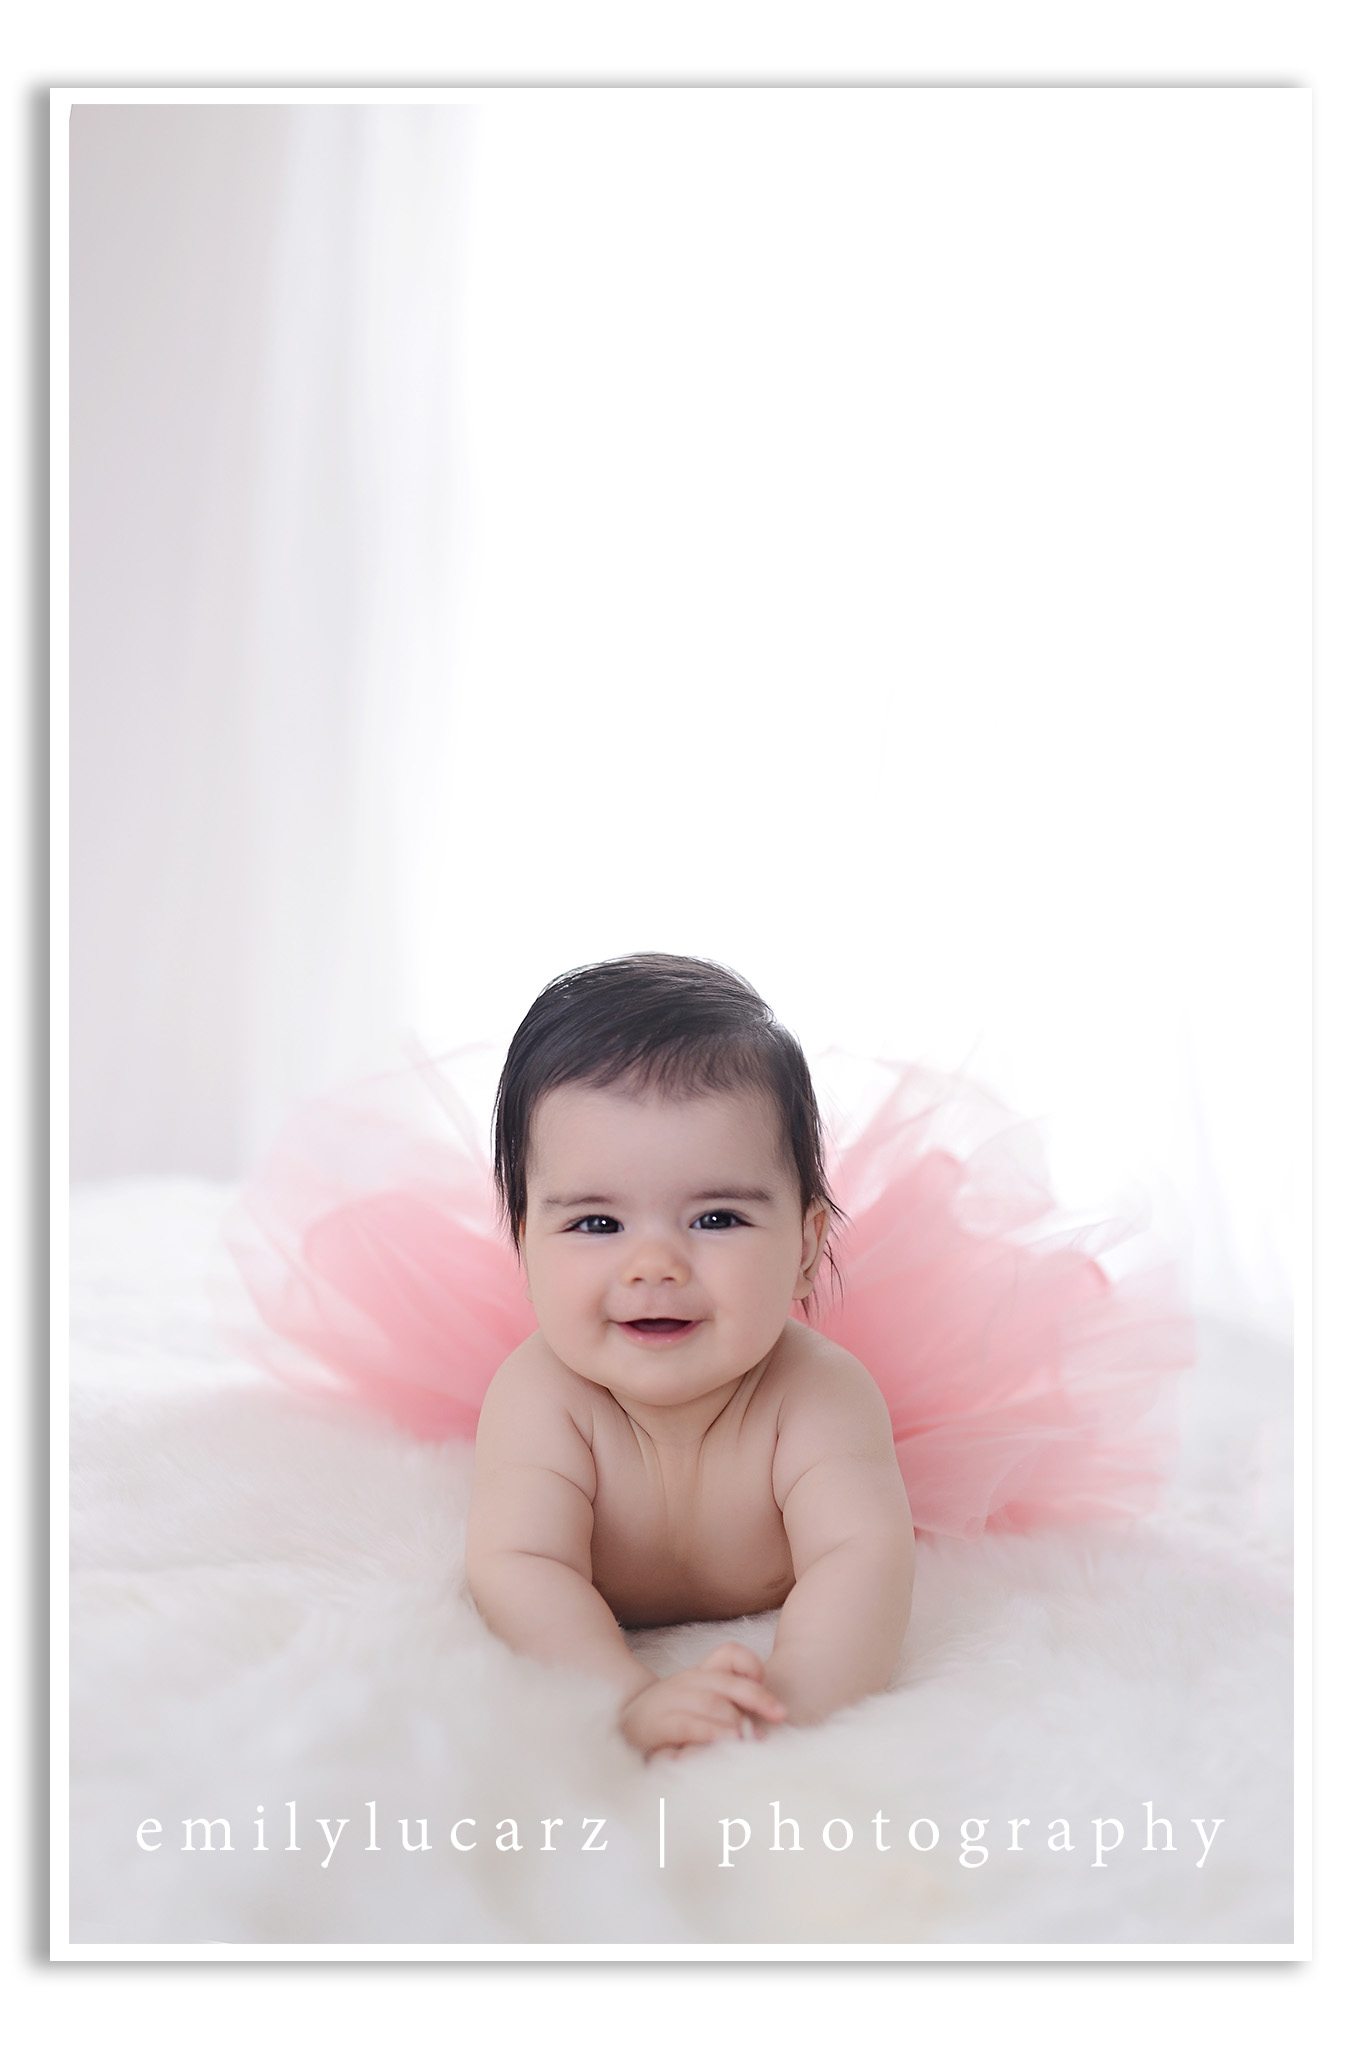 A darling 4 month old girl who had her photo taken in a yellow dress for a baby photography session in St. Louis MO